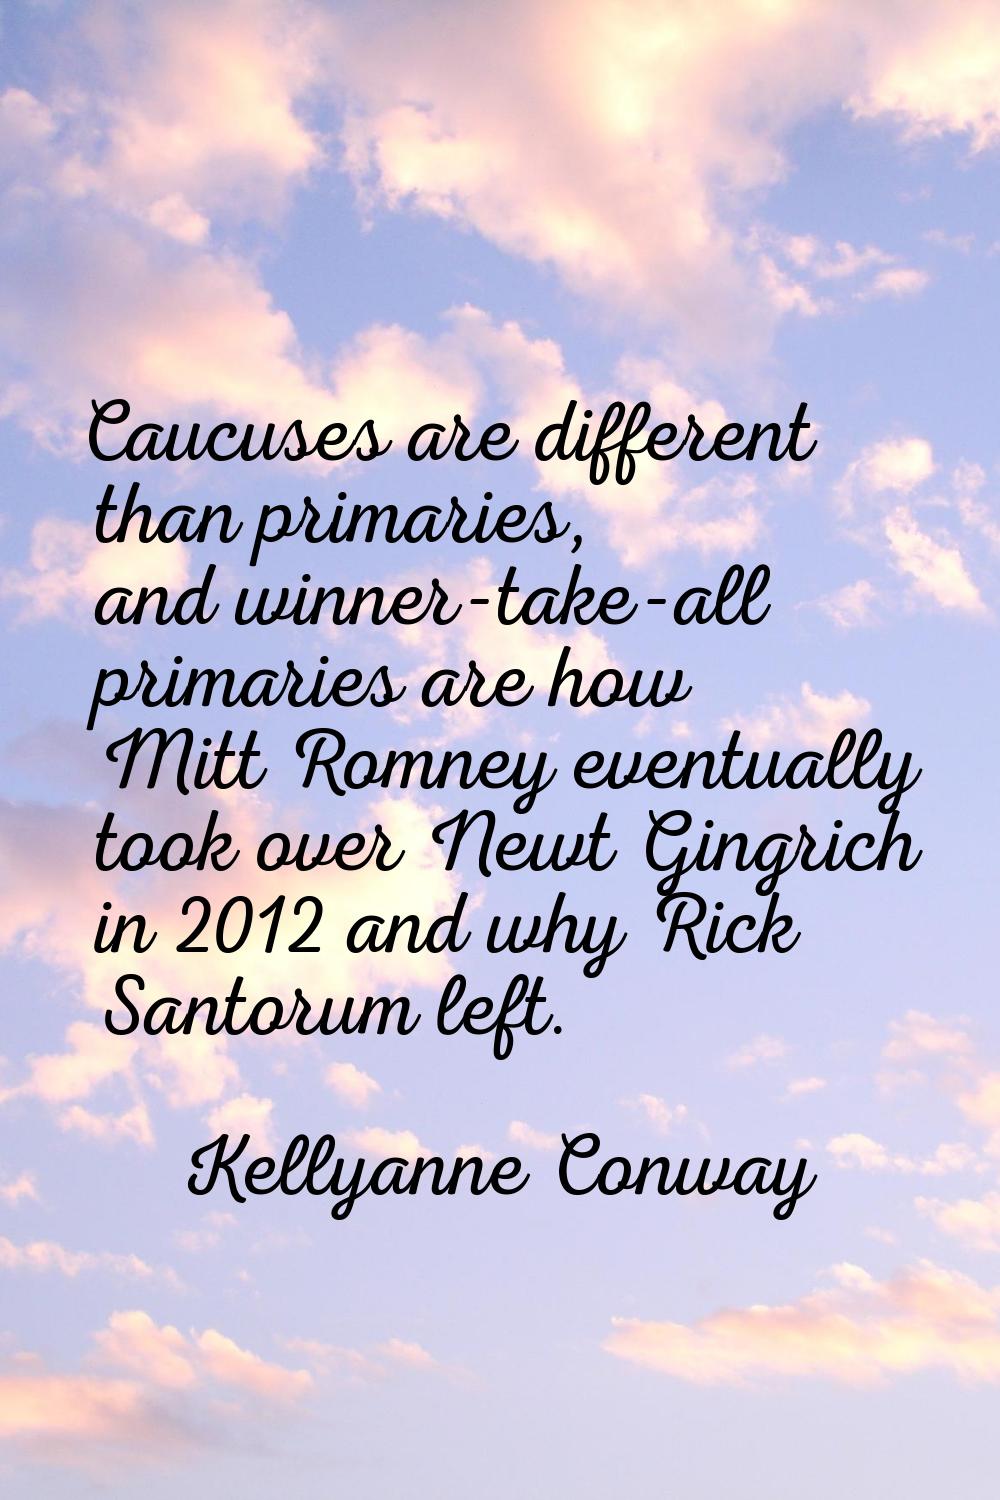 Caucuses are different than primaries, and winner-take-all primaries are how Mitt Romney eventually